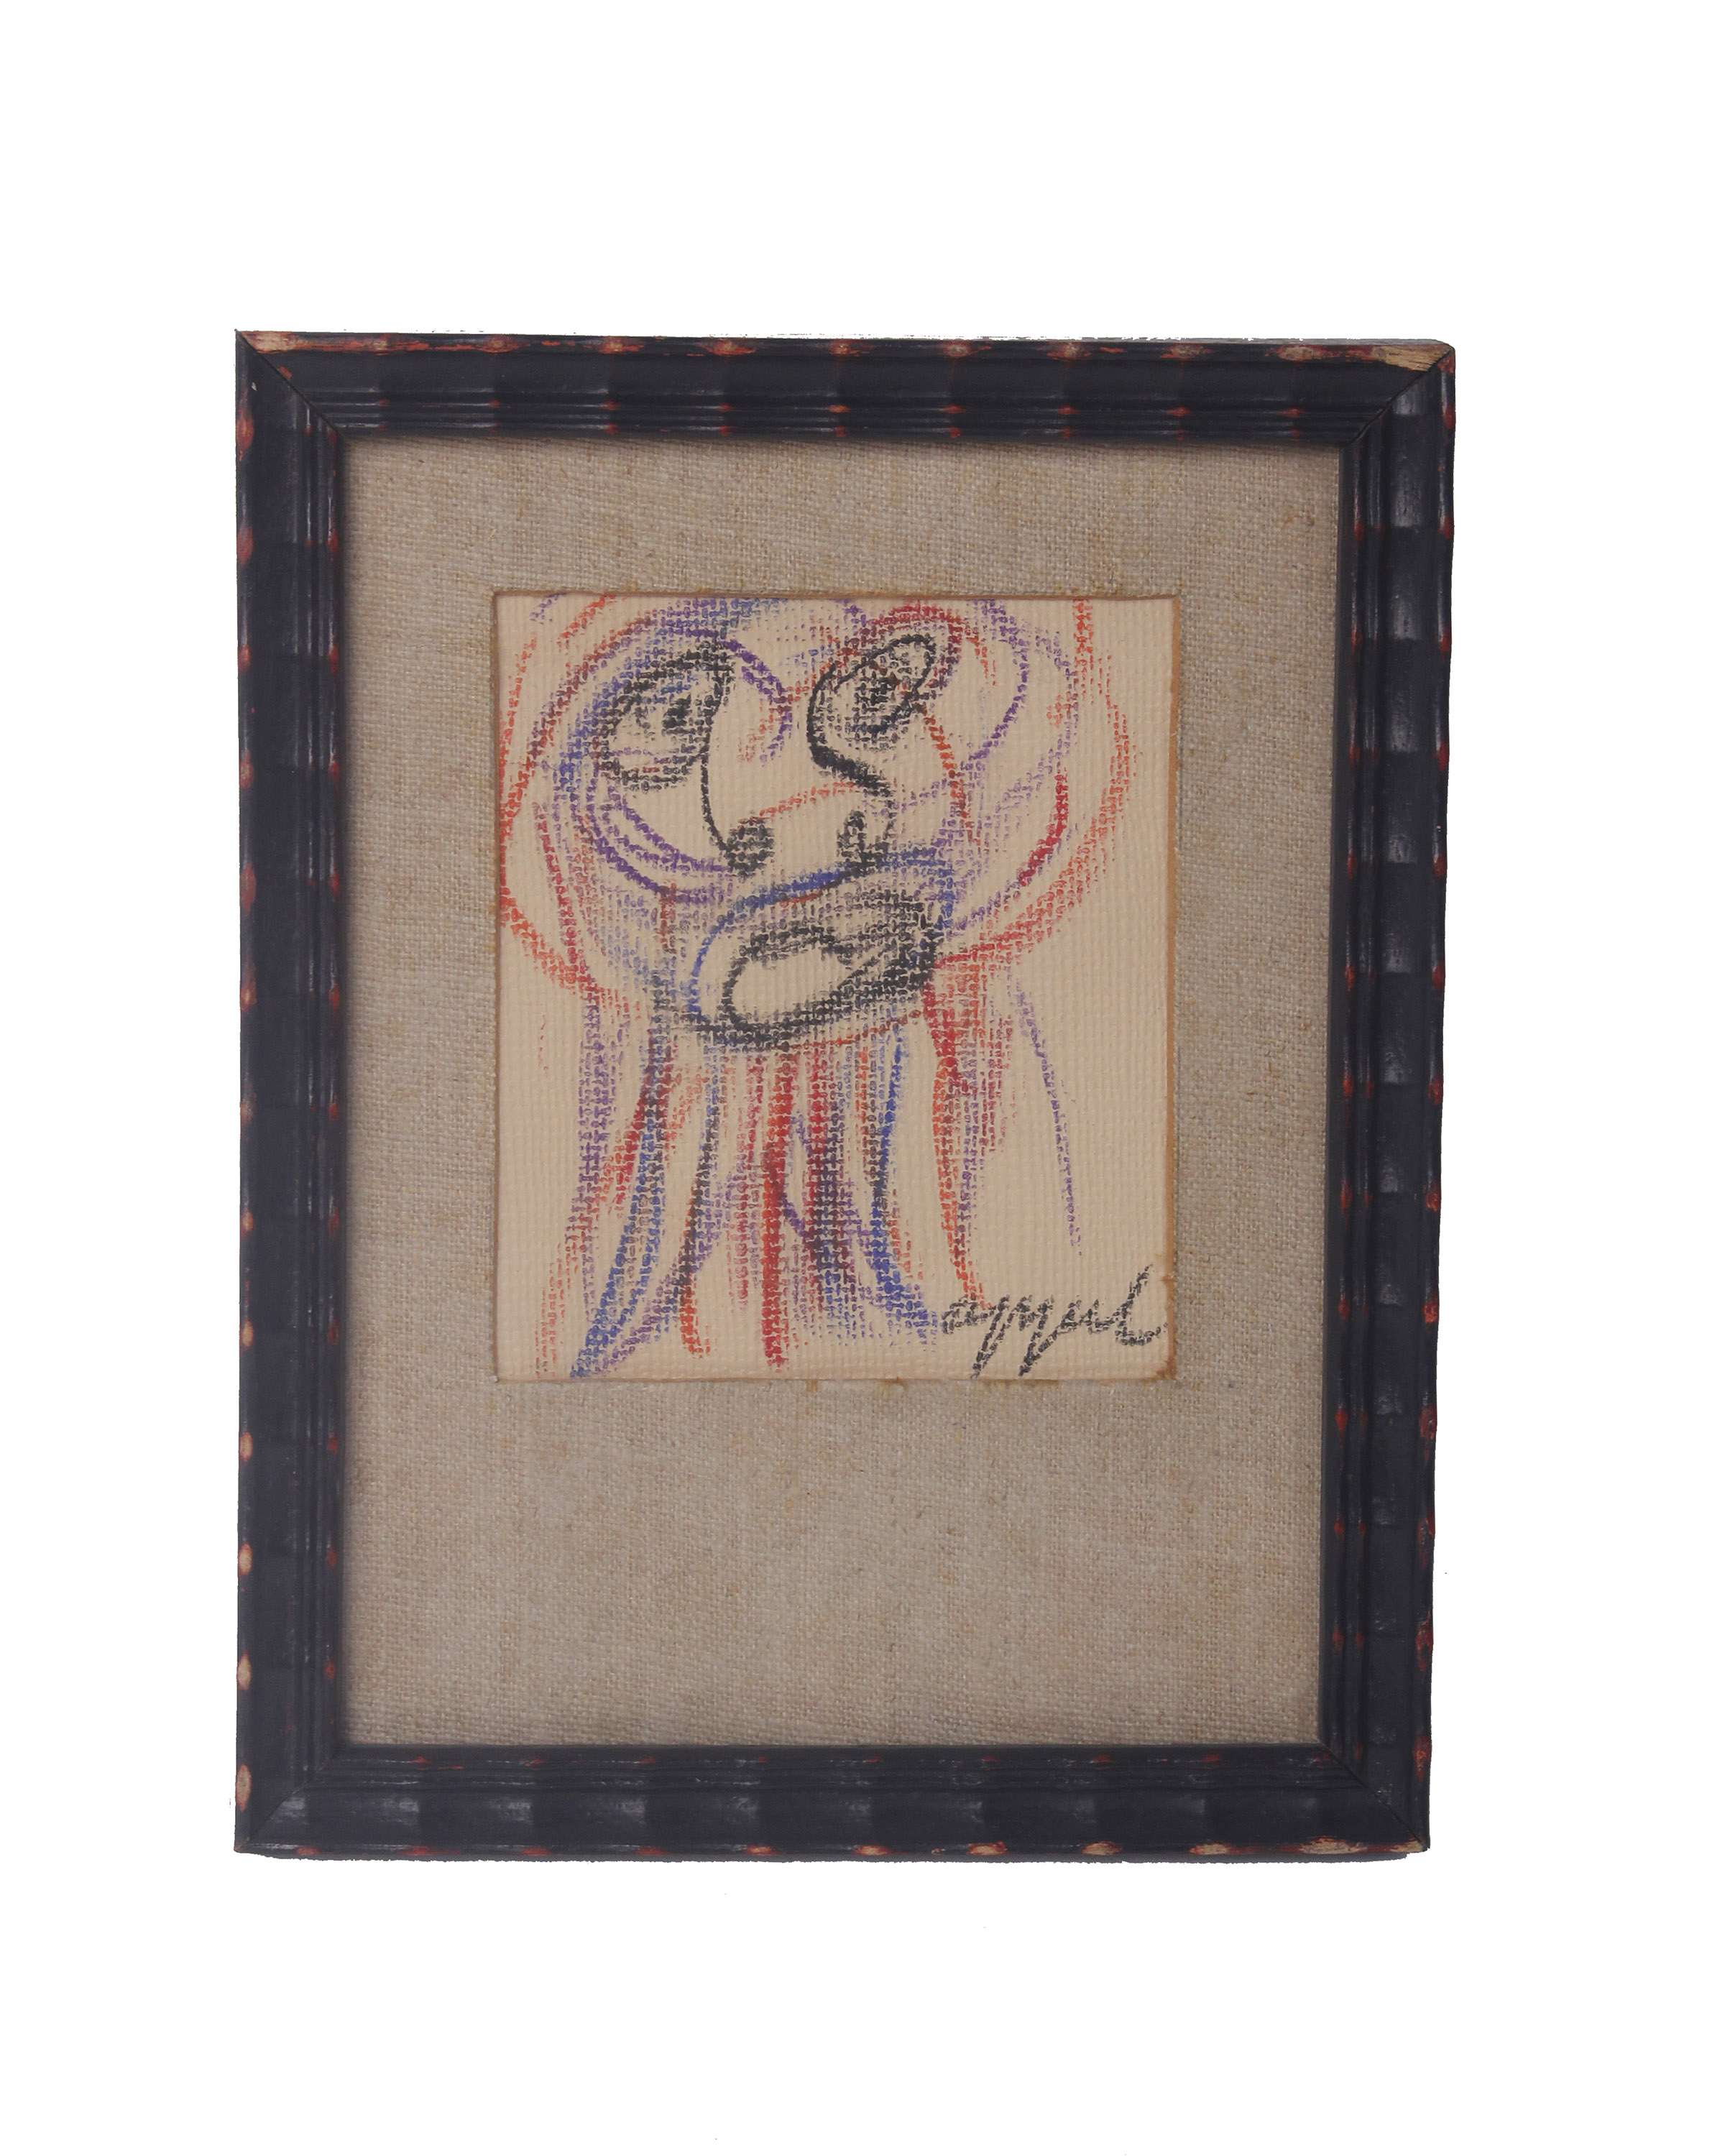 Circle of Karel Appel (Dutch, 1921 - 2006) Pastel on paperSigned ‘Appel’ bottom rightH19.5 x W15